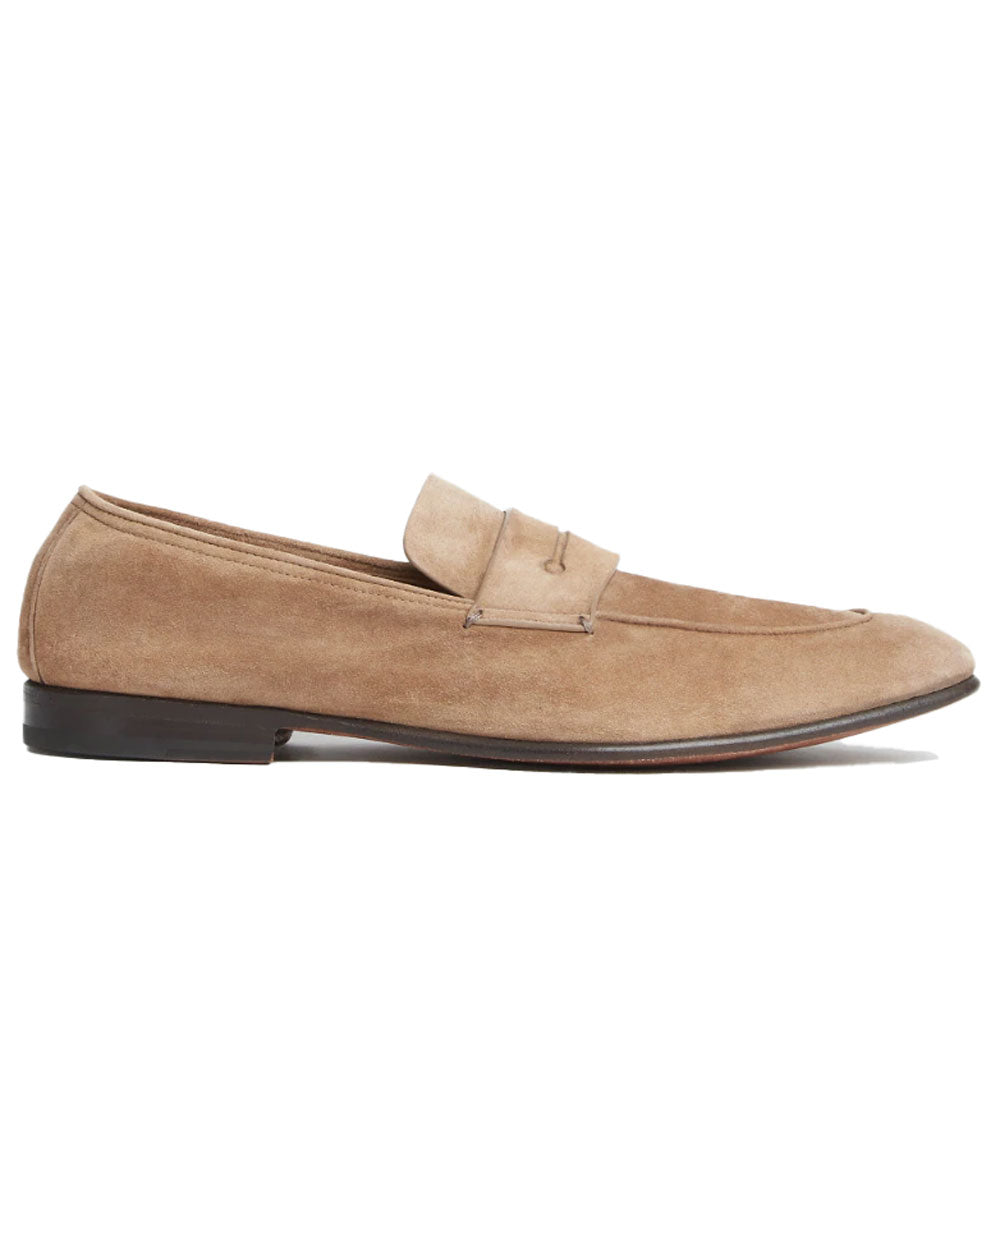 Tan L’Asola Suede Penny Loafer